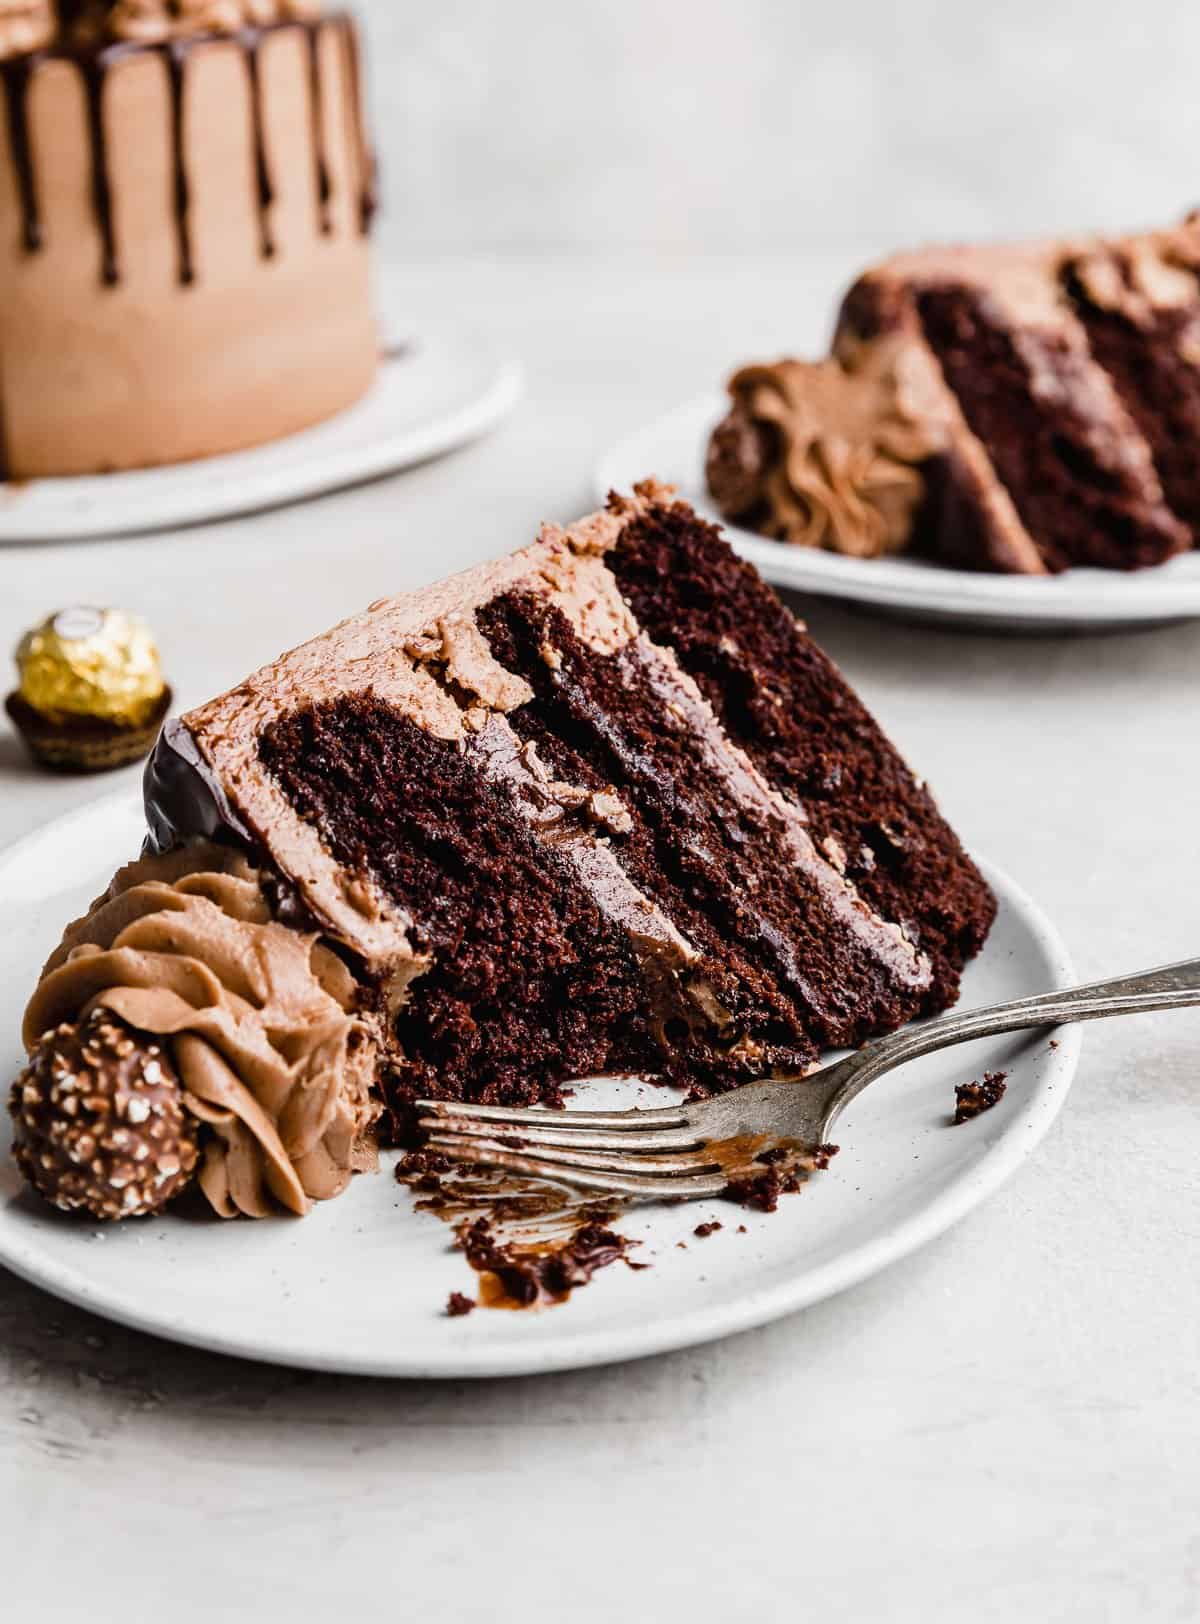 A chocolate hazelnut layer cake on a white plate with a fork next to the slice.